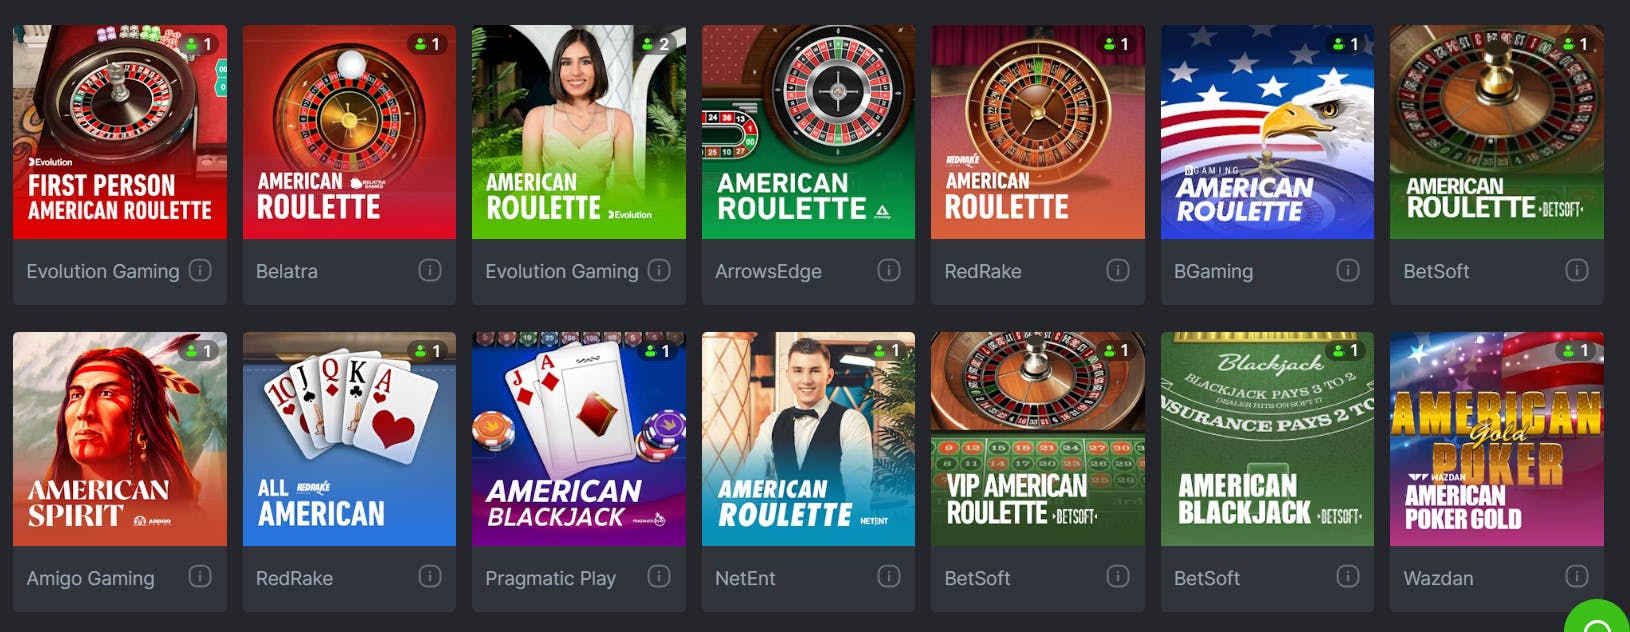 BCGame American Roulette